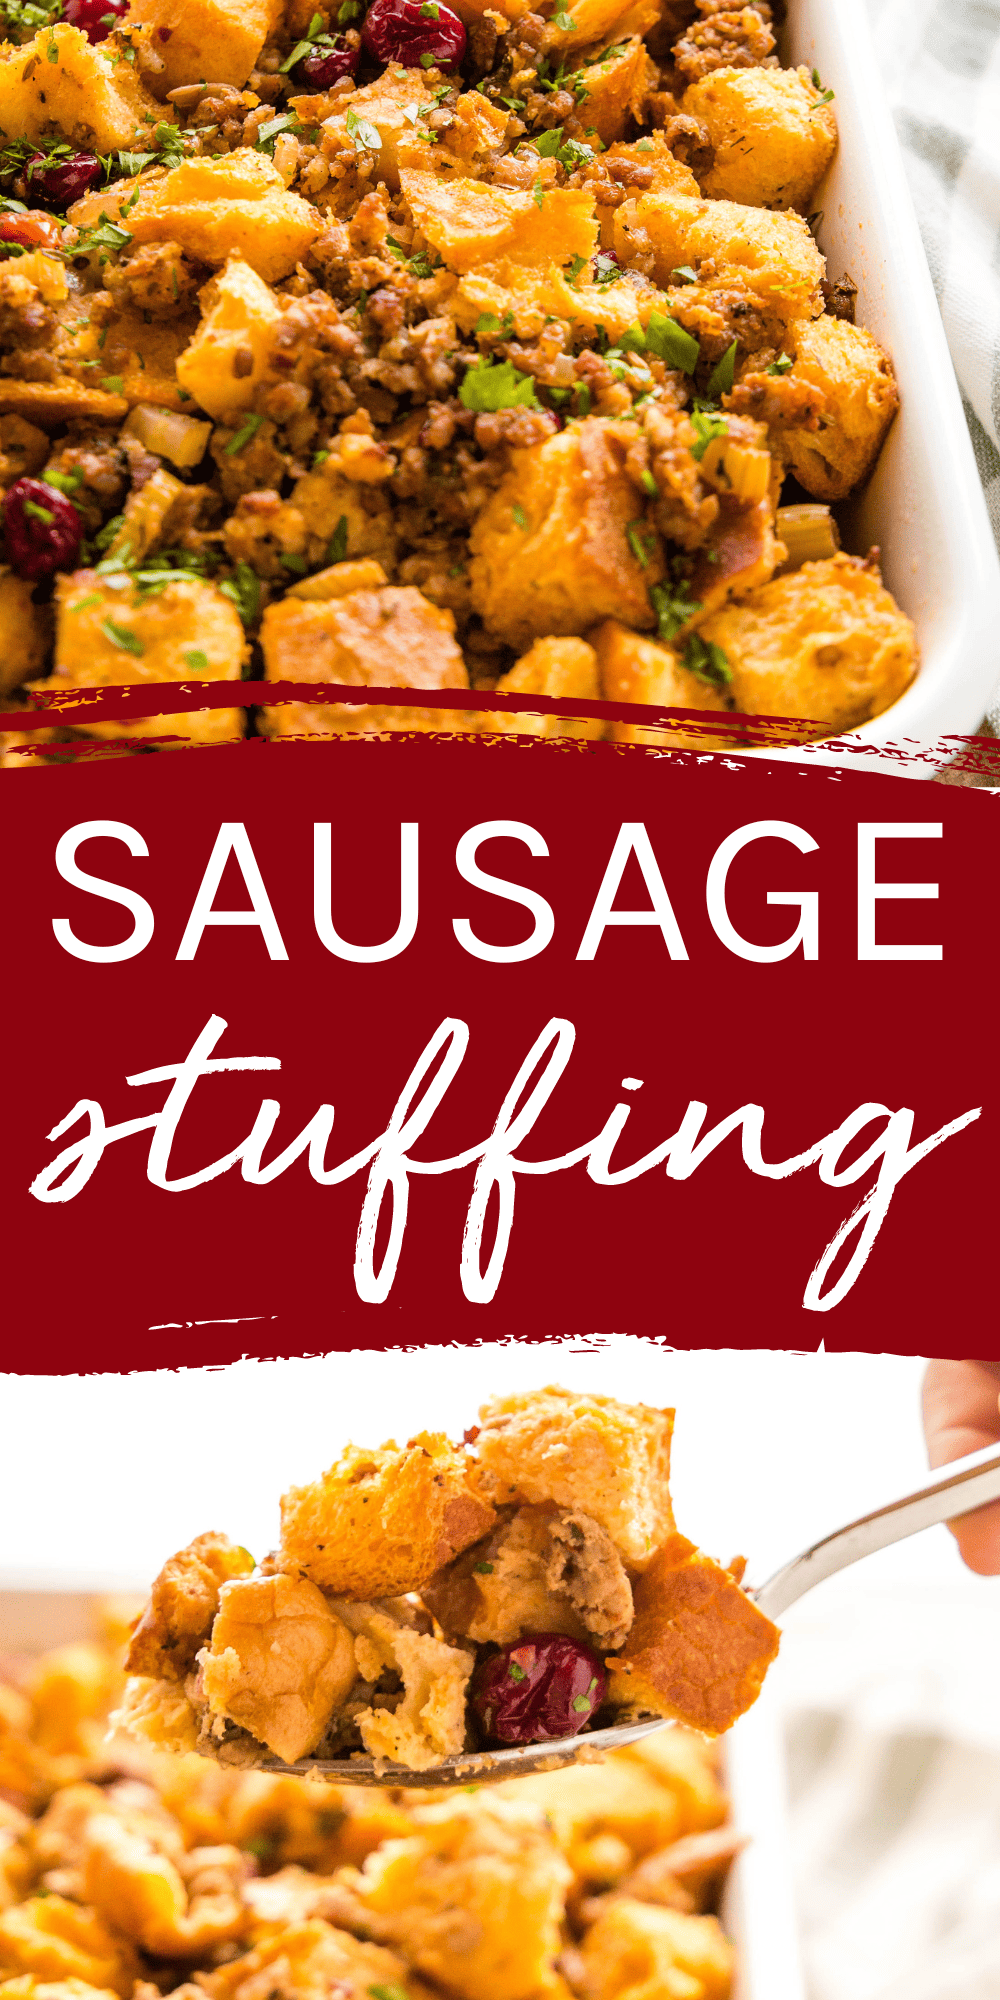 This Sausage Stuffing recipe is an easy, classic & savoury holiday side dish that's perfect for Christmas & Thanksgiving! Recipe from thebusybaker.ca! #sausagestuffing #sausagestuffingrecipe #stuffingrecipe #sausagerecipe #holidaysidedish #christmasrecipe #thanksgivingrecipe #christmas #thanksgiving #thanksgivingstuffing #christmasstuffing via @busybakerblog